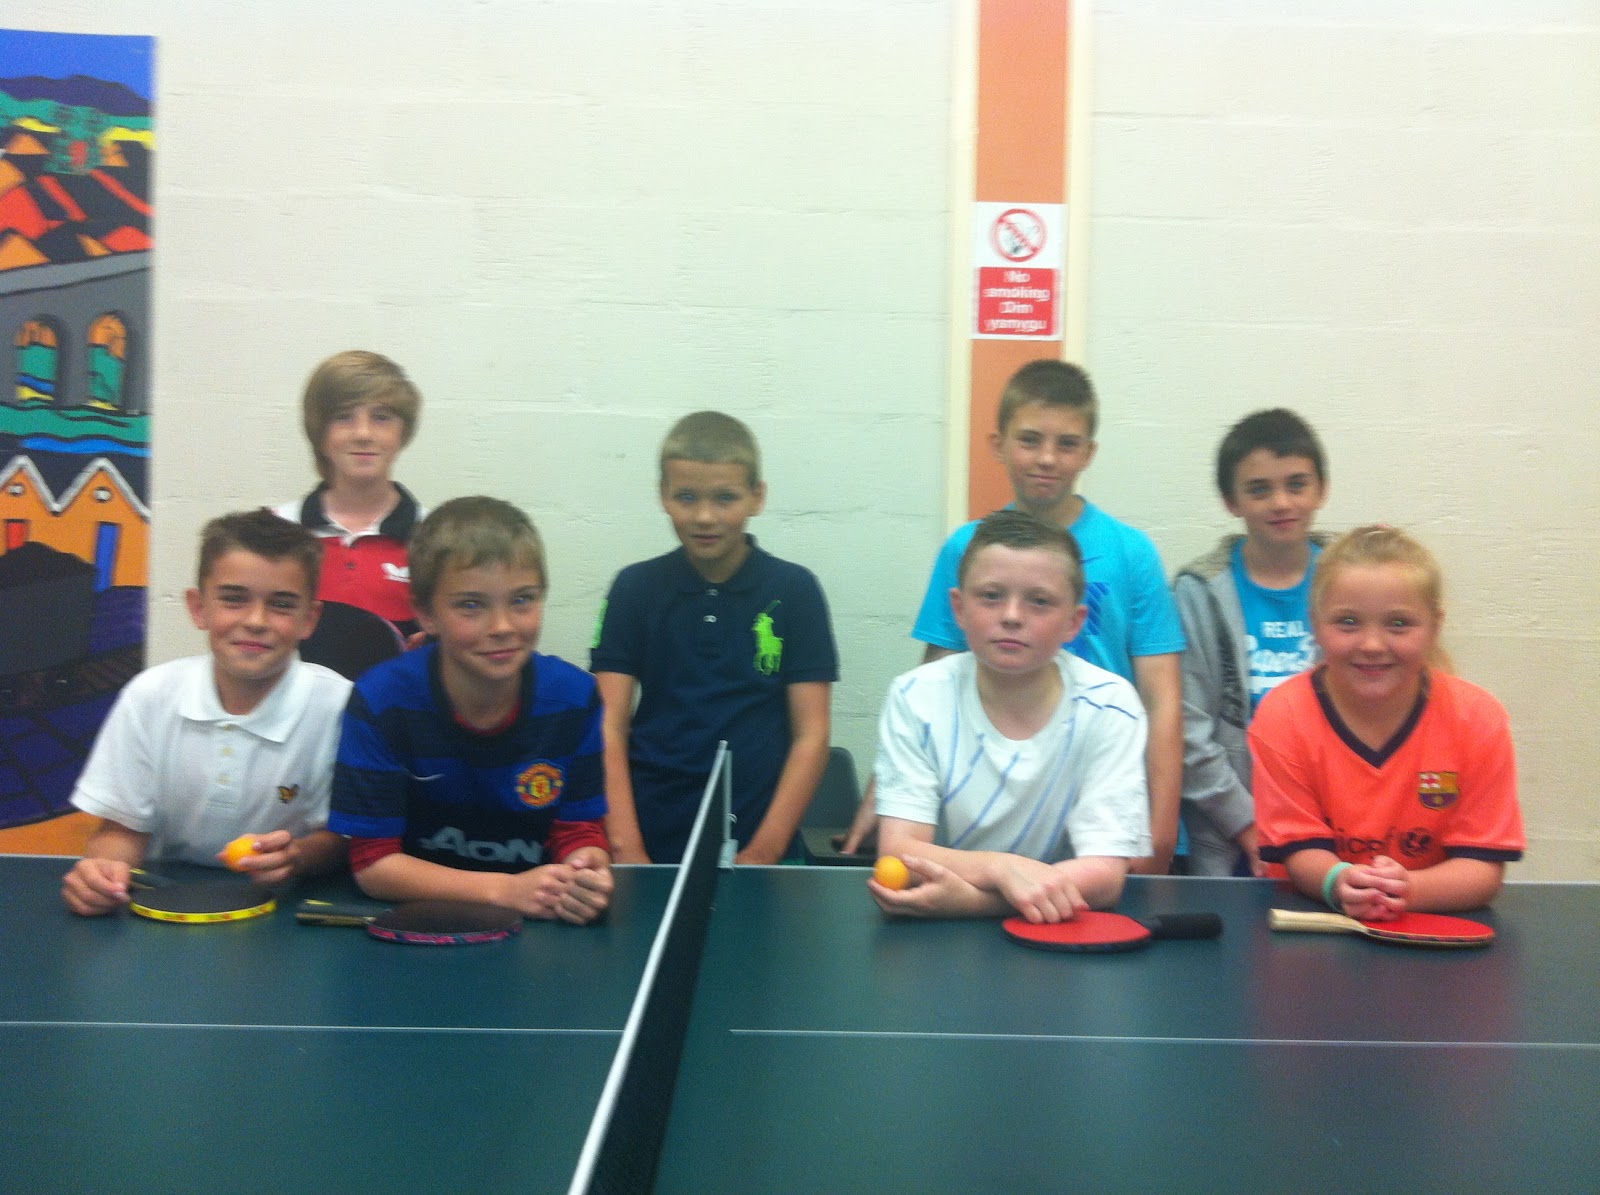 Cardiff Dragon Results - Table Tennis Wales